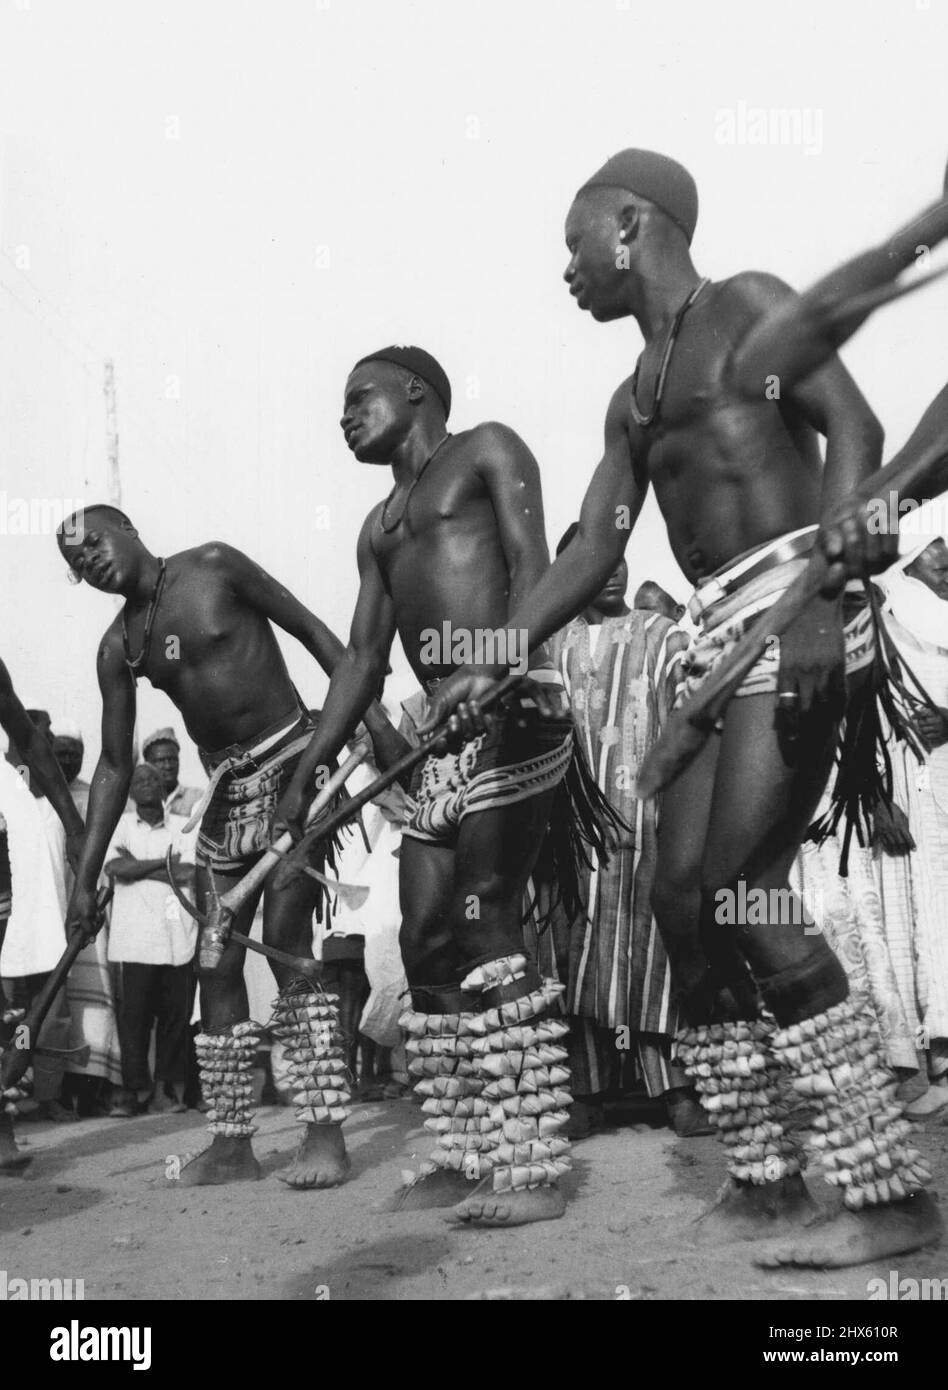 This was one of the tribal dances the Queen saw when she attended the rally of nearly 7,000 Northern ian tribesmen at Kaduna on Thursday (2-2-56). The tribesman danced to the accompaniment of seedpods tied round their legs. February 17, 1955. (Photo by Daily Mirror).;This was one of the tribal dances the Queen saw when she attended the rally of nearly 7,000 Northern ian tribesmen at Kaduna on Thursday (2-2-56). The tribesman danced to the accompaniment of seedpods tied round their legs Stock Photo